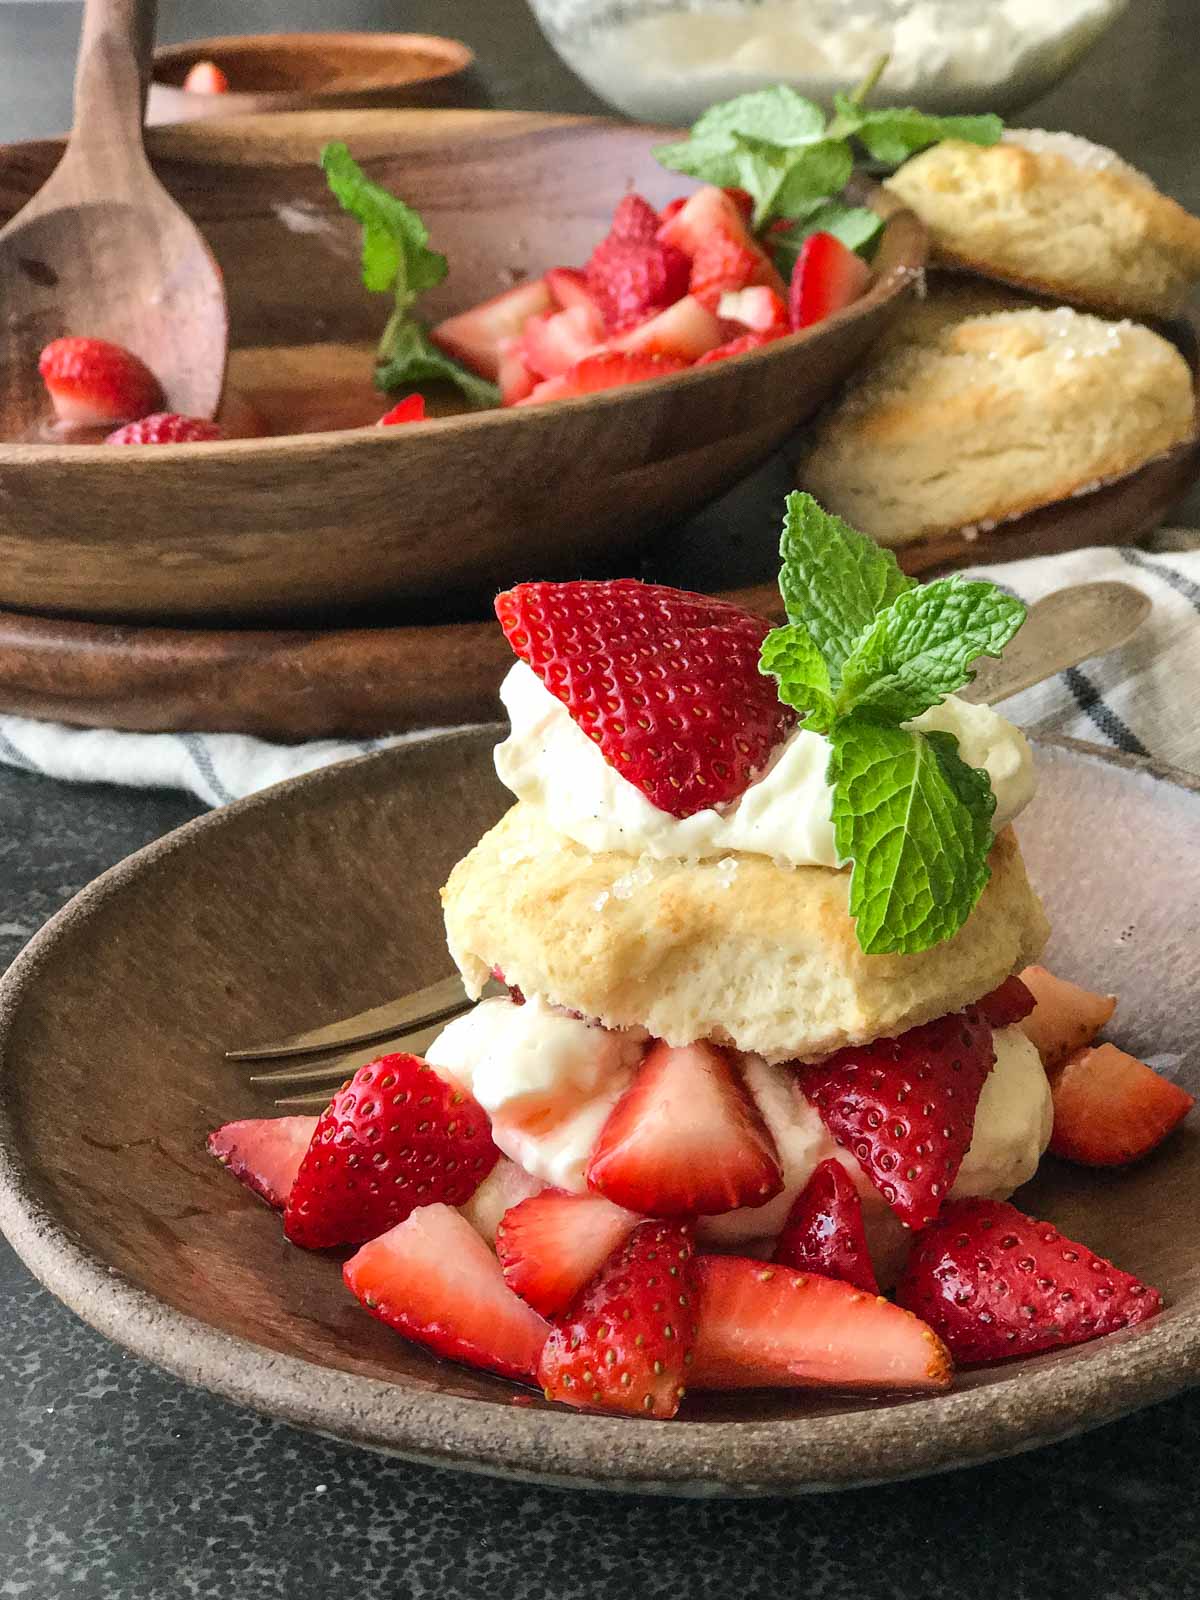 These Homemade Strawberry Shortcakes have a slightly sweetened fluffy buttermilk biscuit with red ripe strawberries and freshly whipped cream!